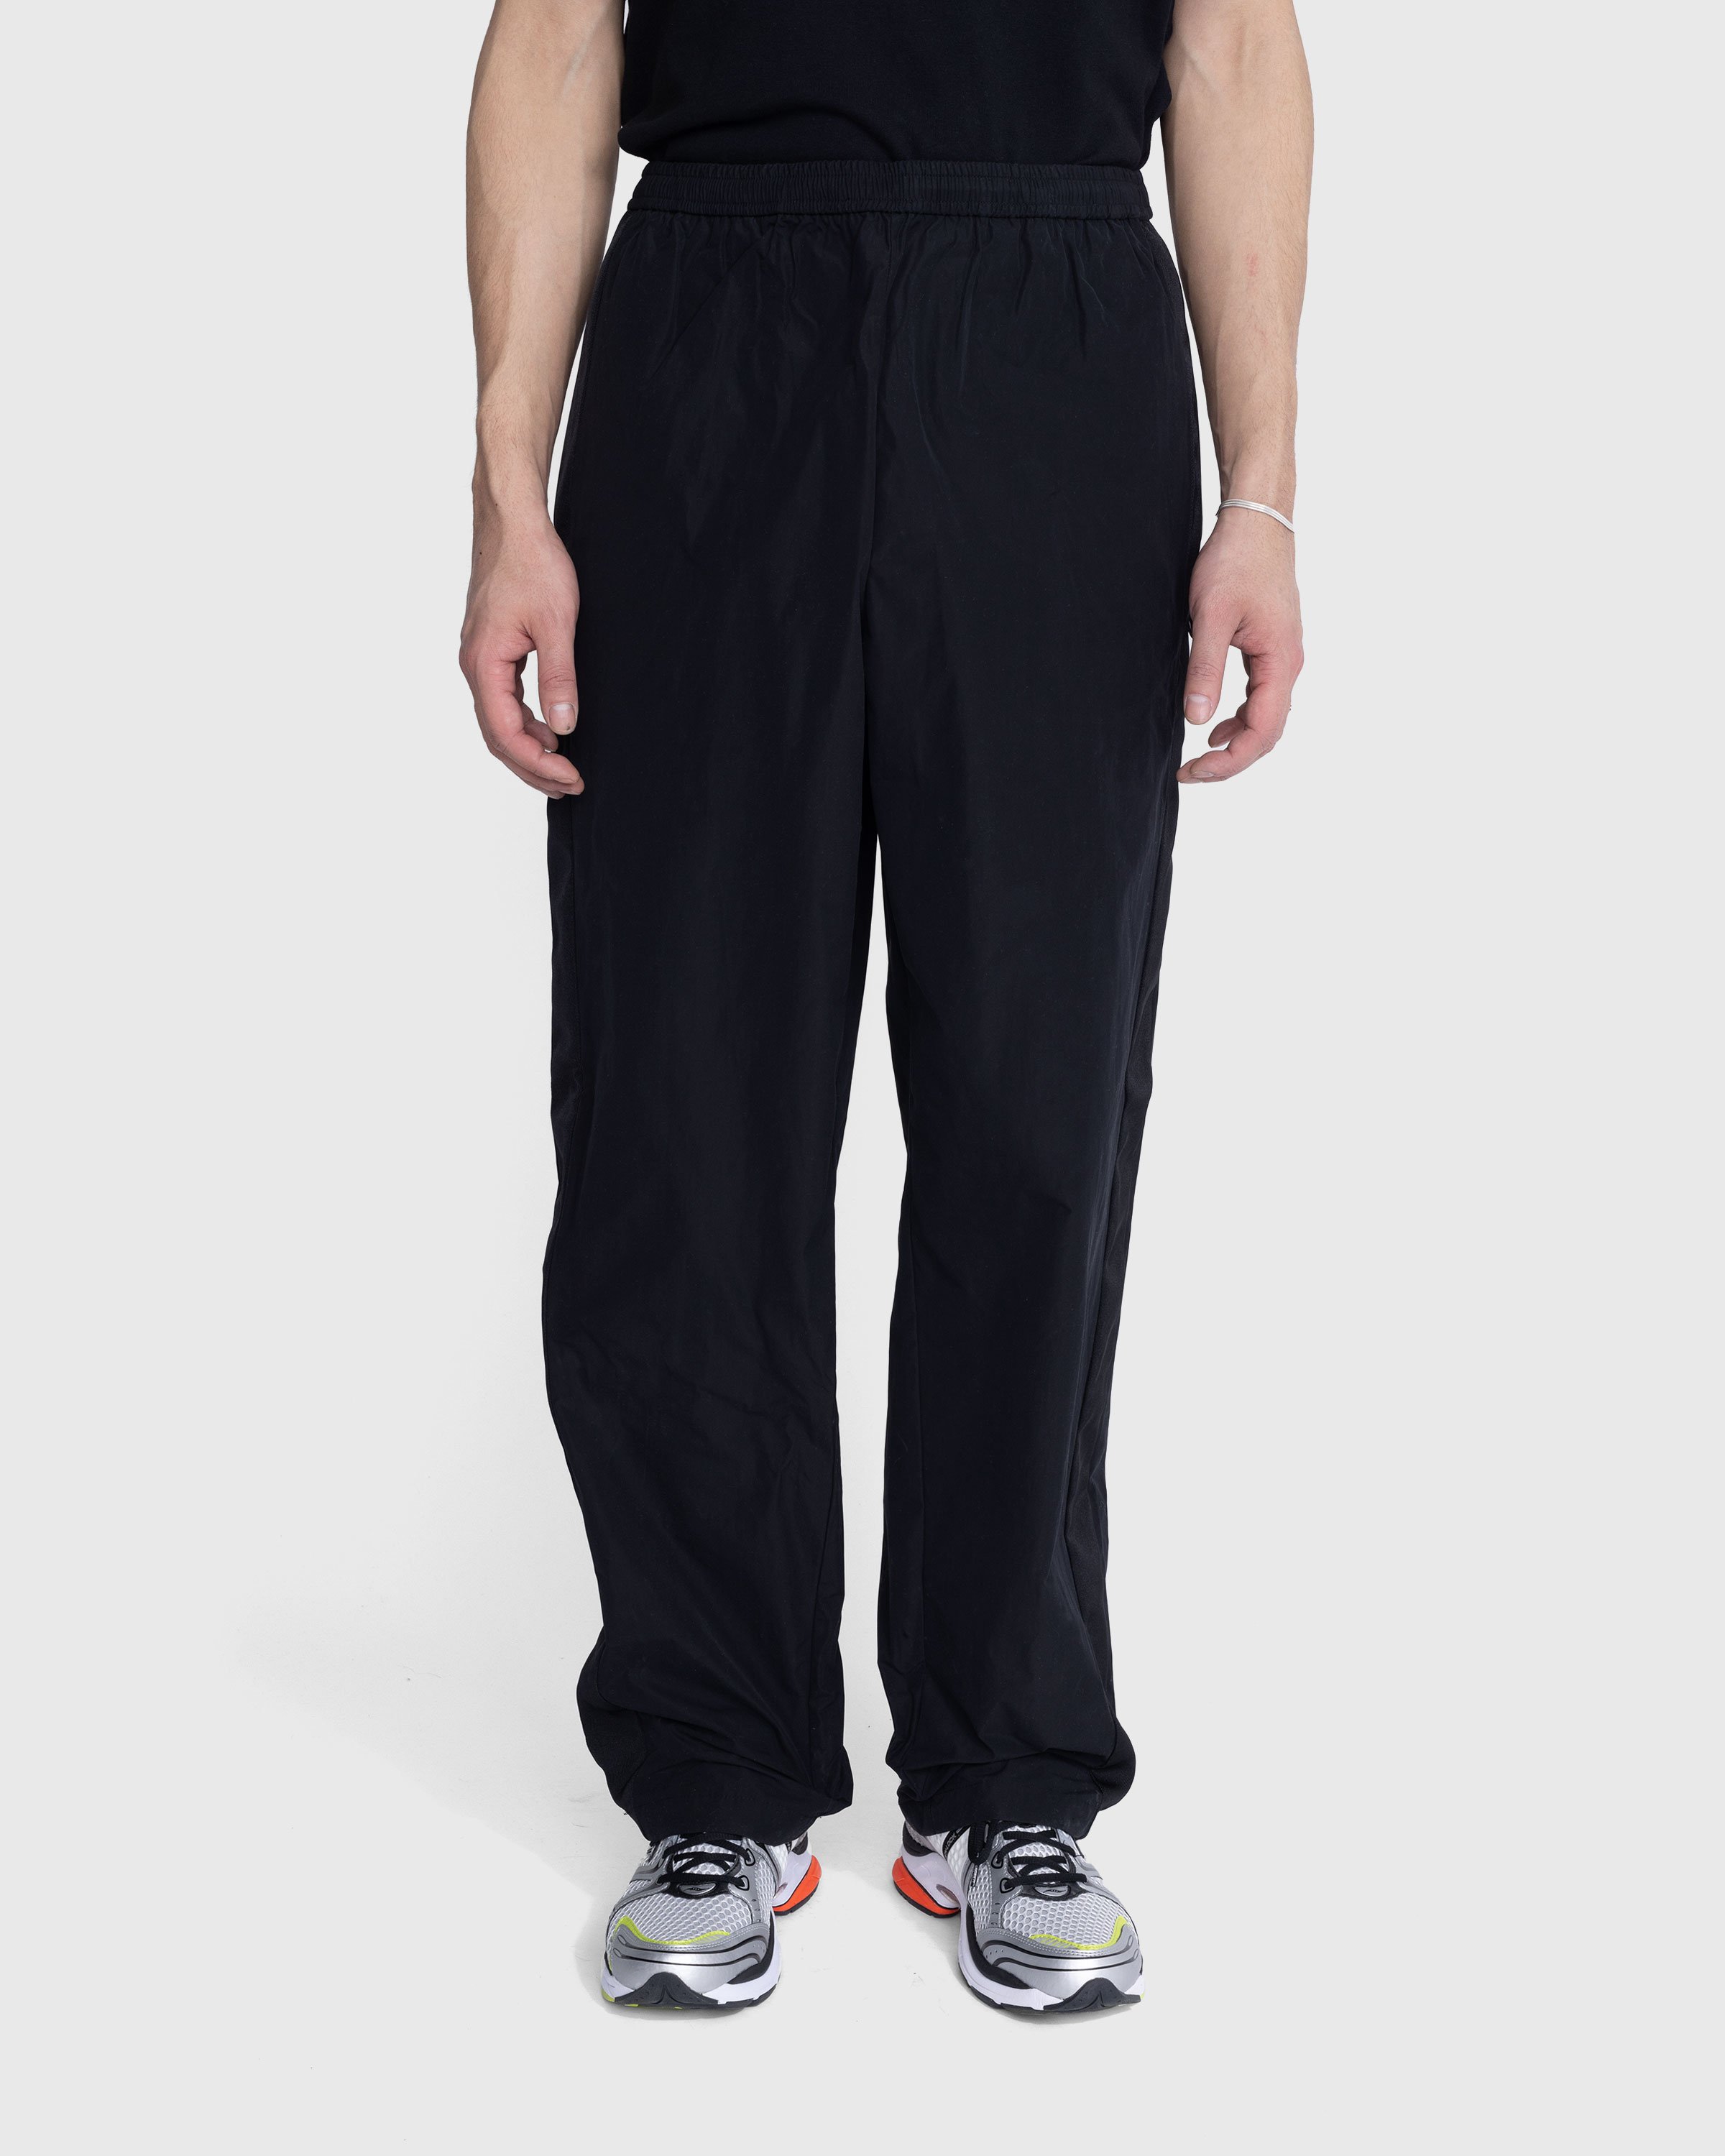 Acne Studios - Relaxed Fit Trousers Black - Clothing - Black - Image 2